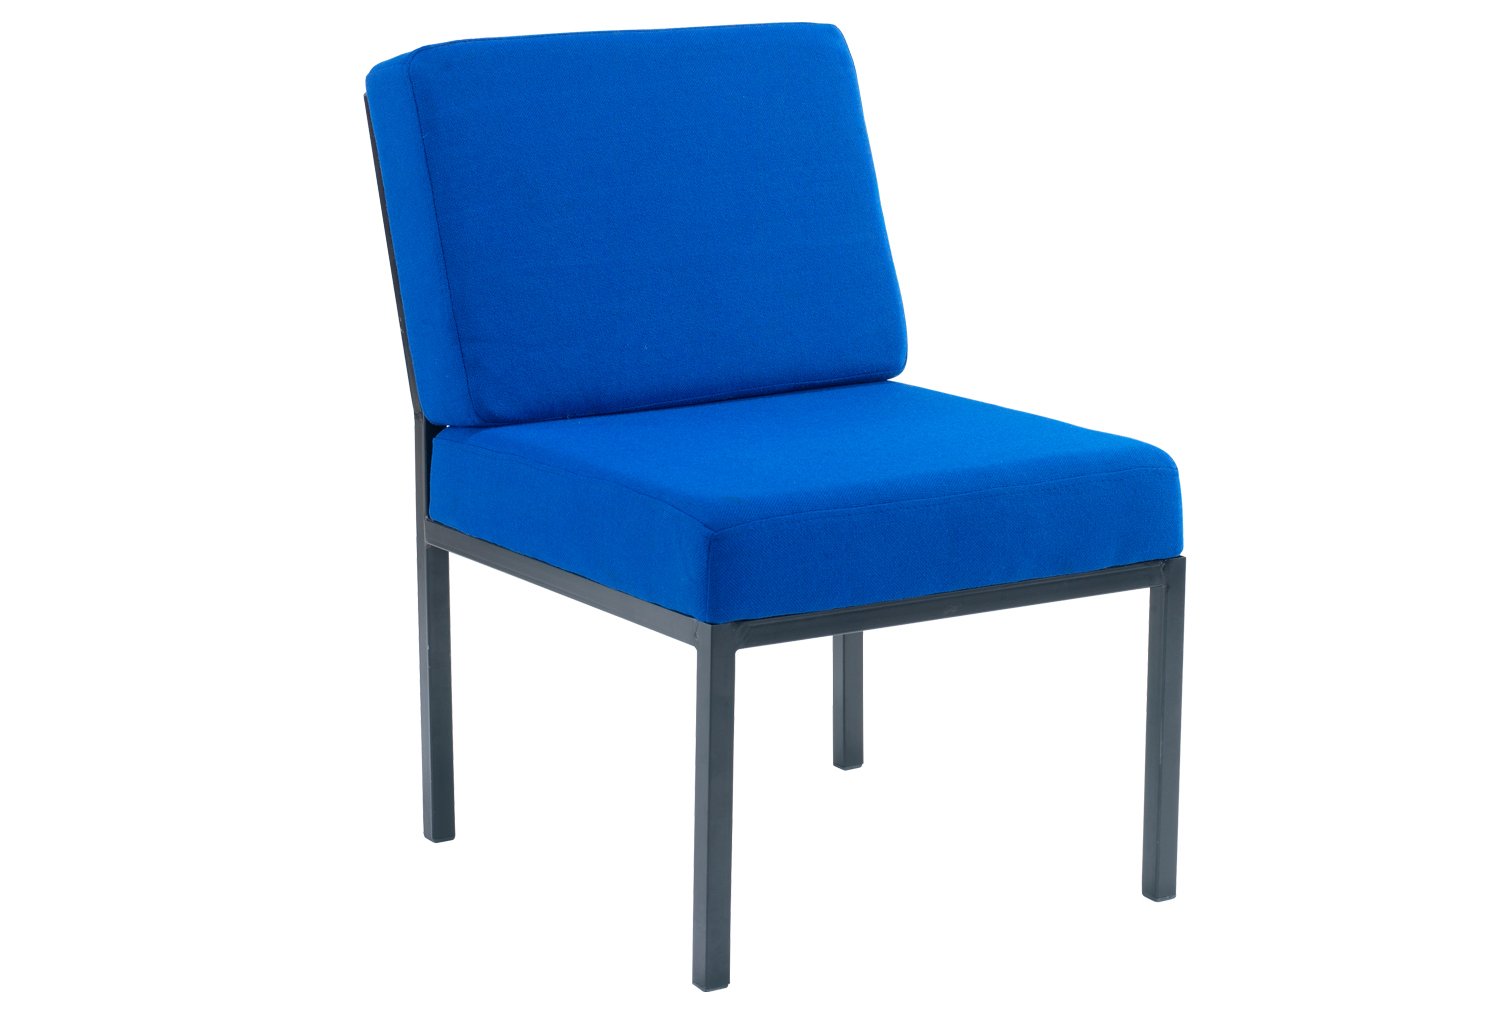 Metz Steel Framed Reception Chair, Blue, Express Delivery